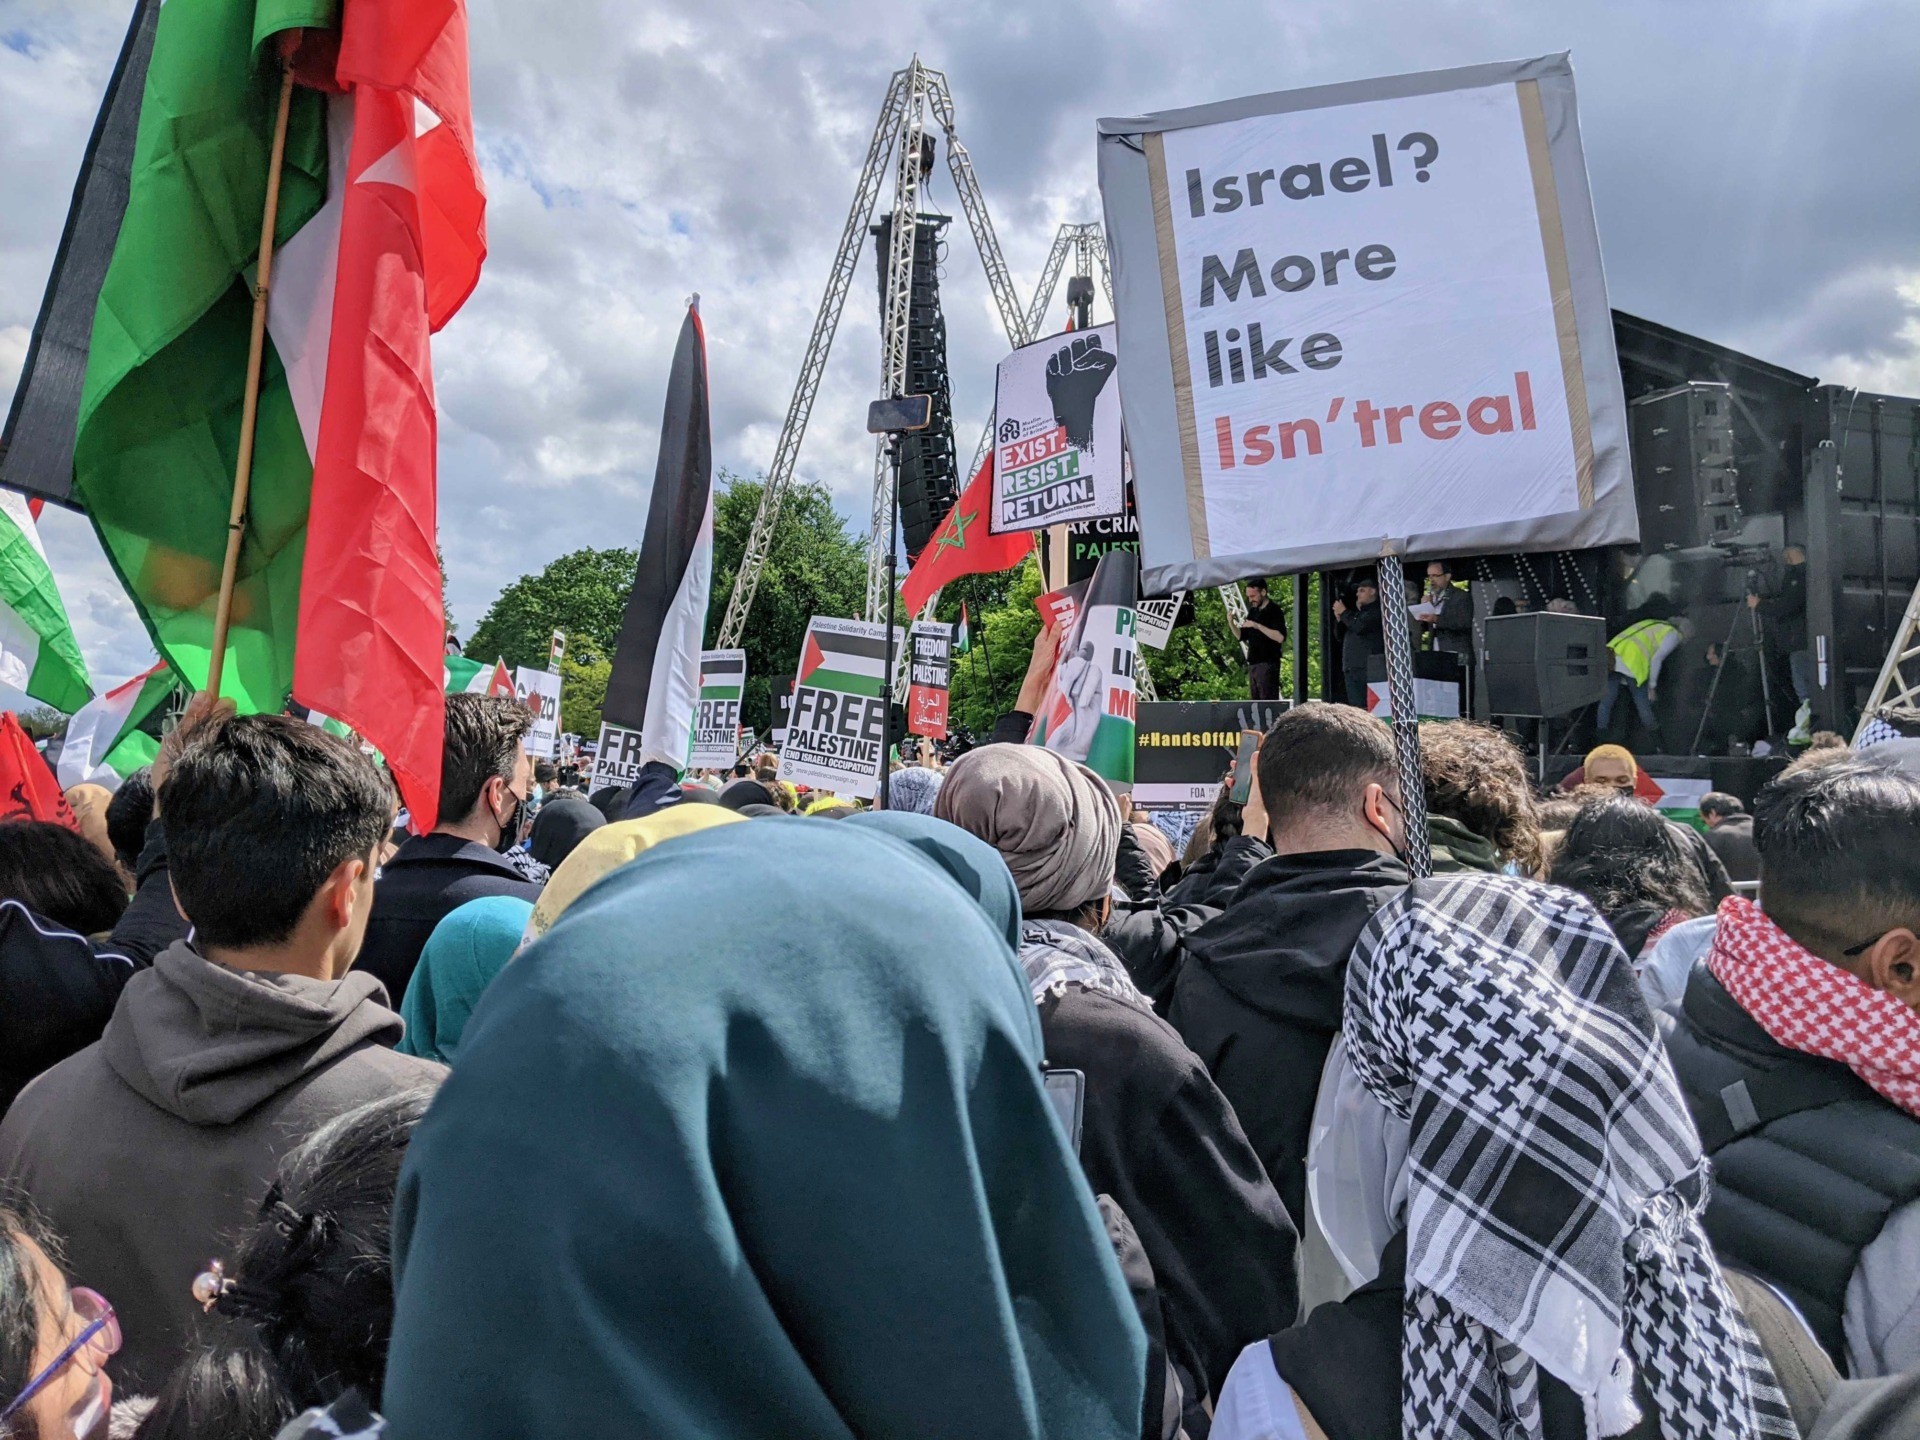 A placard reading: "Israel? More like Isn't Real" is seen at a pro-Palestine demonstration in London on May 22nd, 2021. Kurt Zindulka, Breitbart News